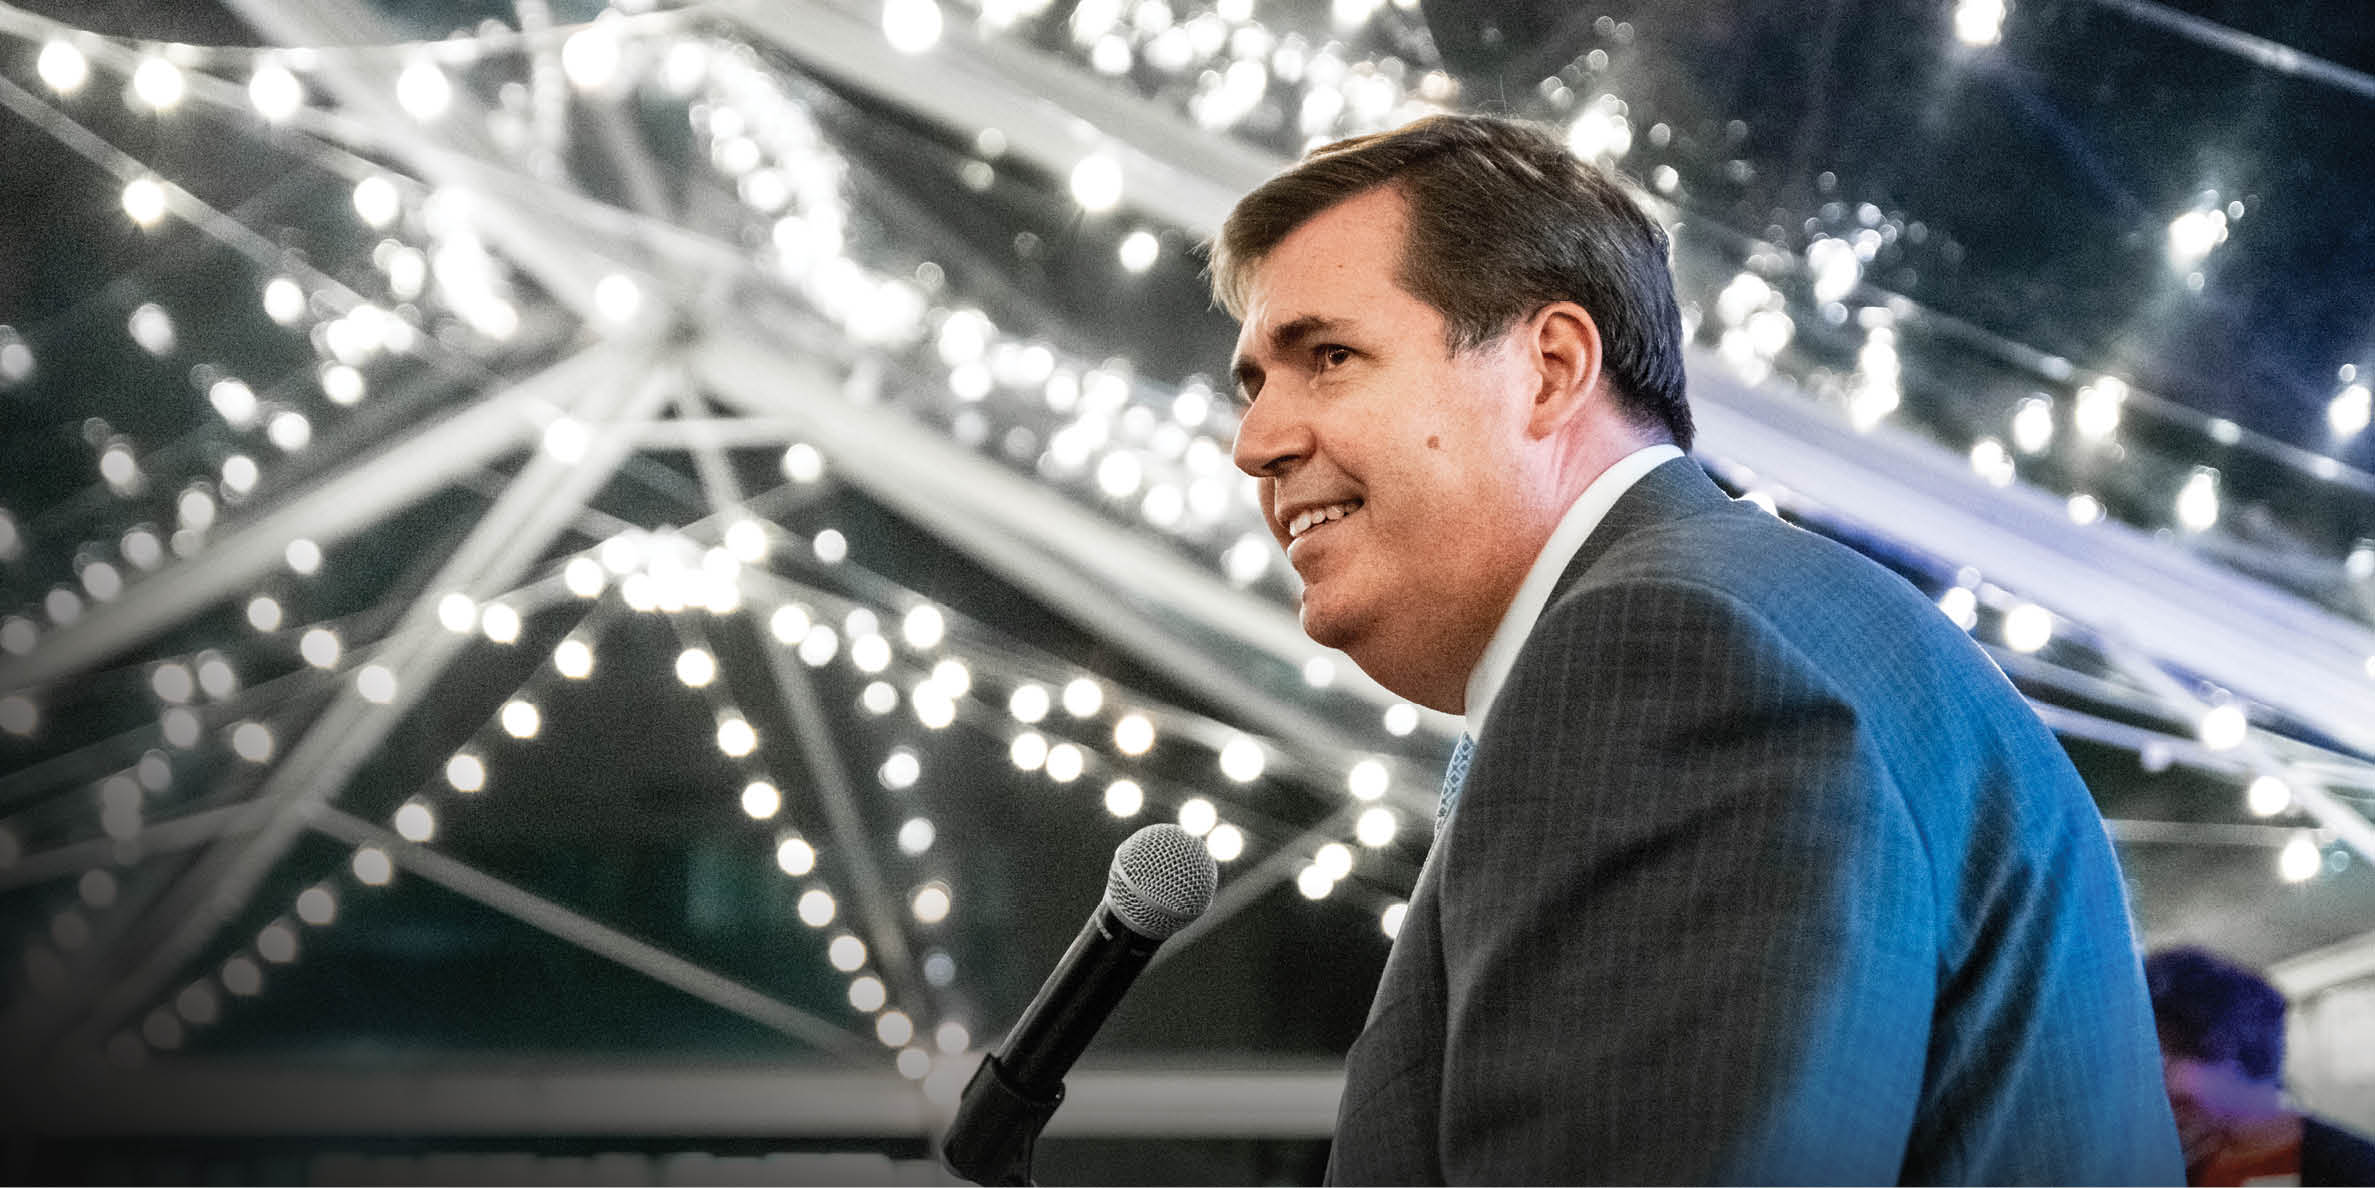 President Thayne McCulloh speaks at a microphone, with sparkling lights above him.